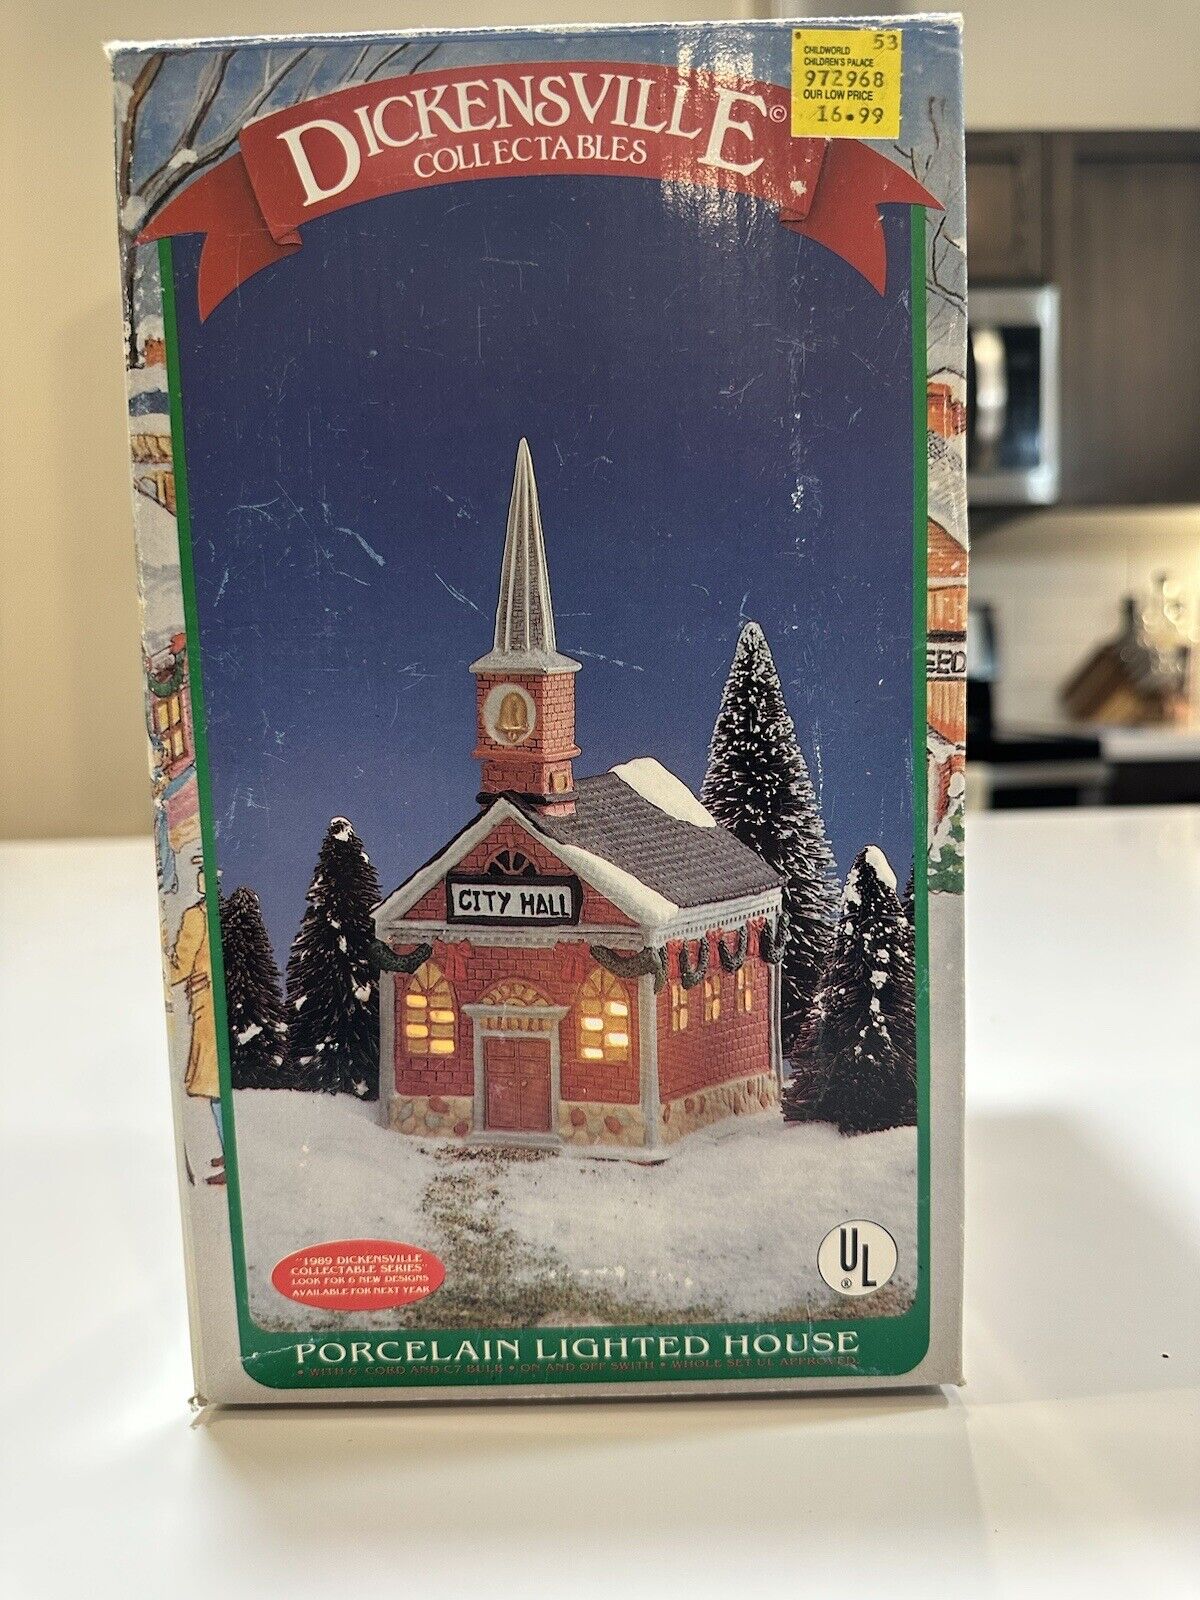 Dickensville Lighted Porcelain House for Christmas Village - City Hall